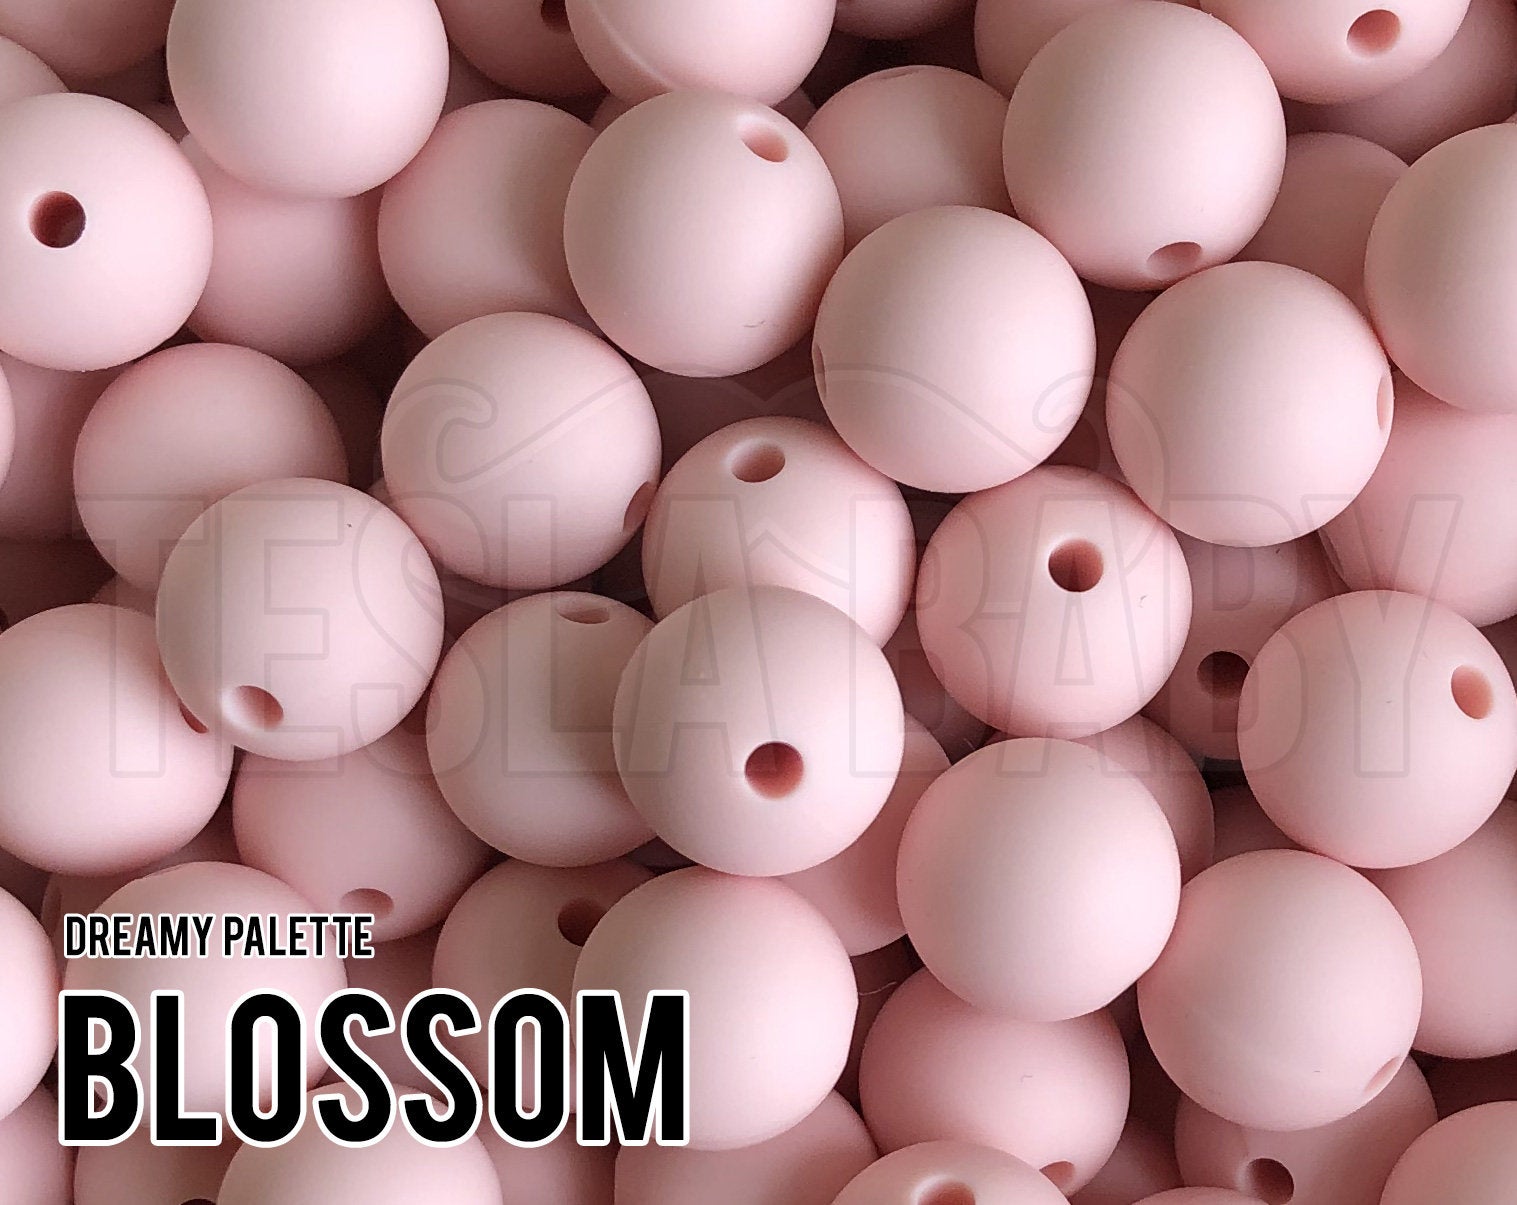 Silicone Beads, 12 mm Blossom Silicone Beads - Dreamy Palette - 5-1,000 (aka light pink, barely pink, pastel pink) Bulk Wholesale